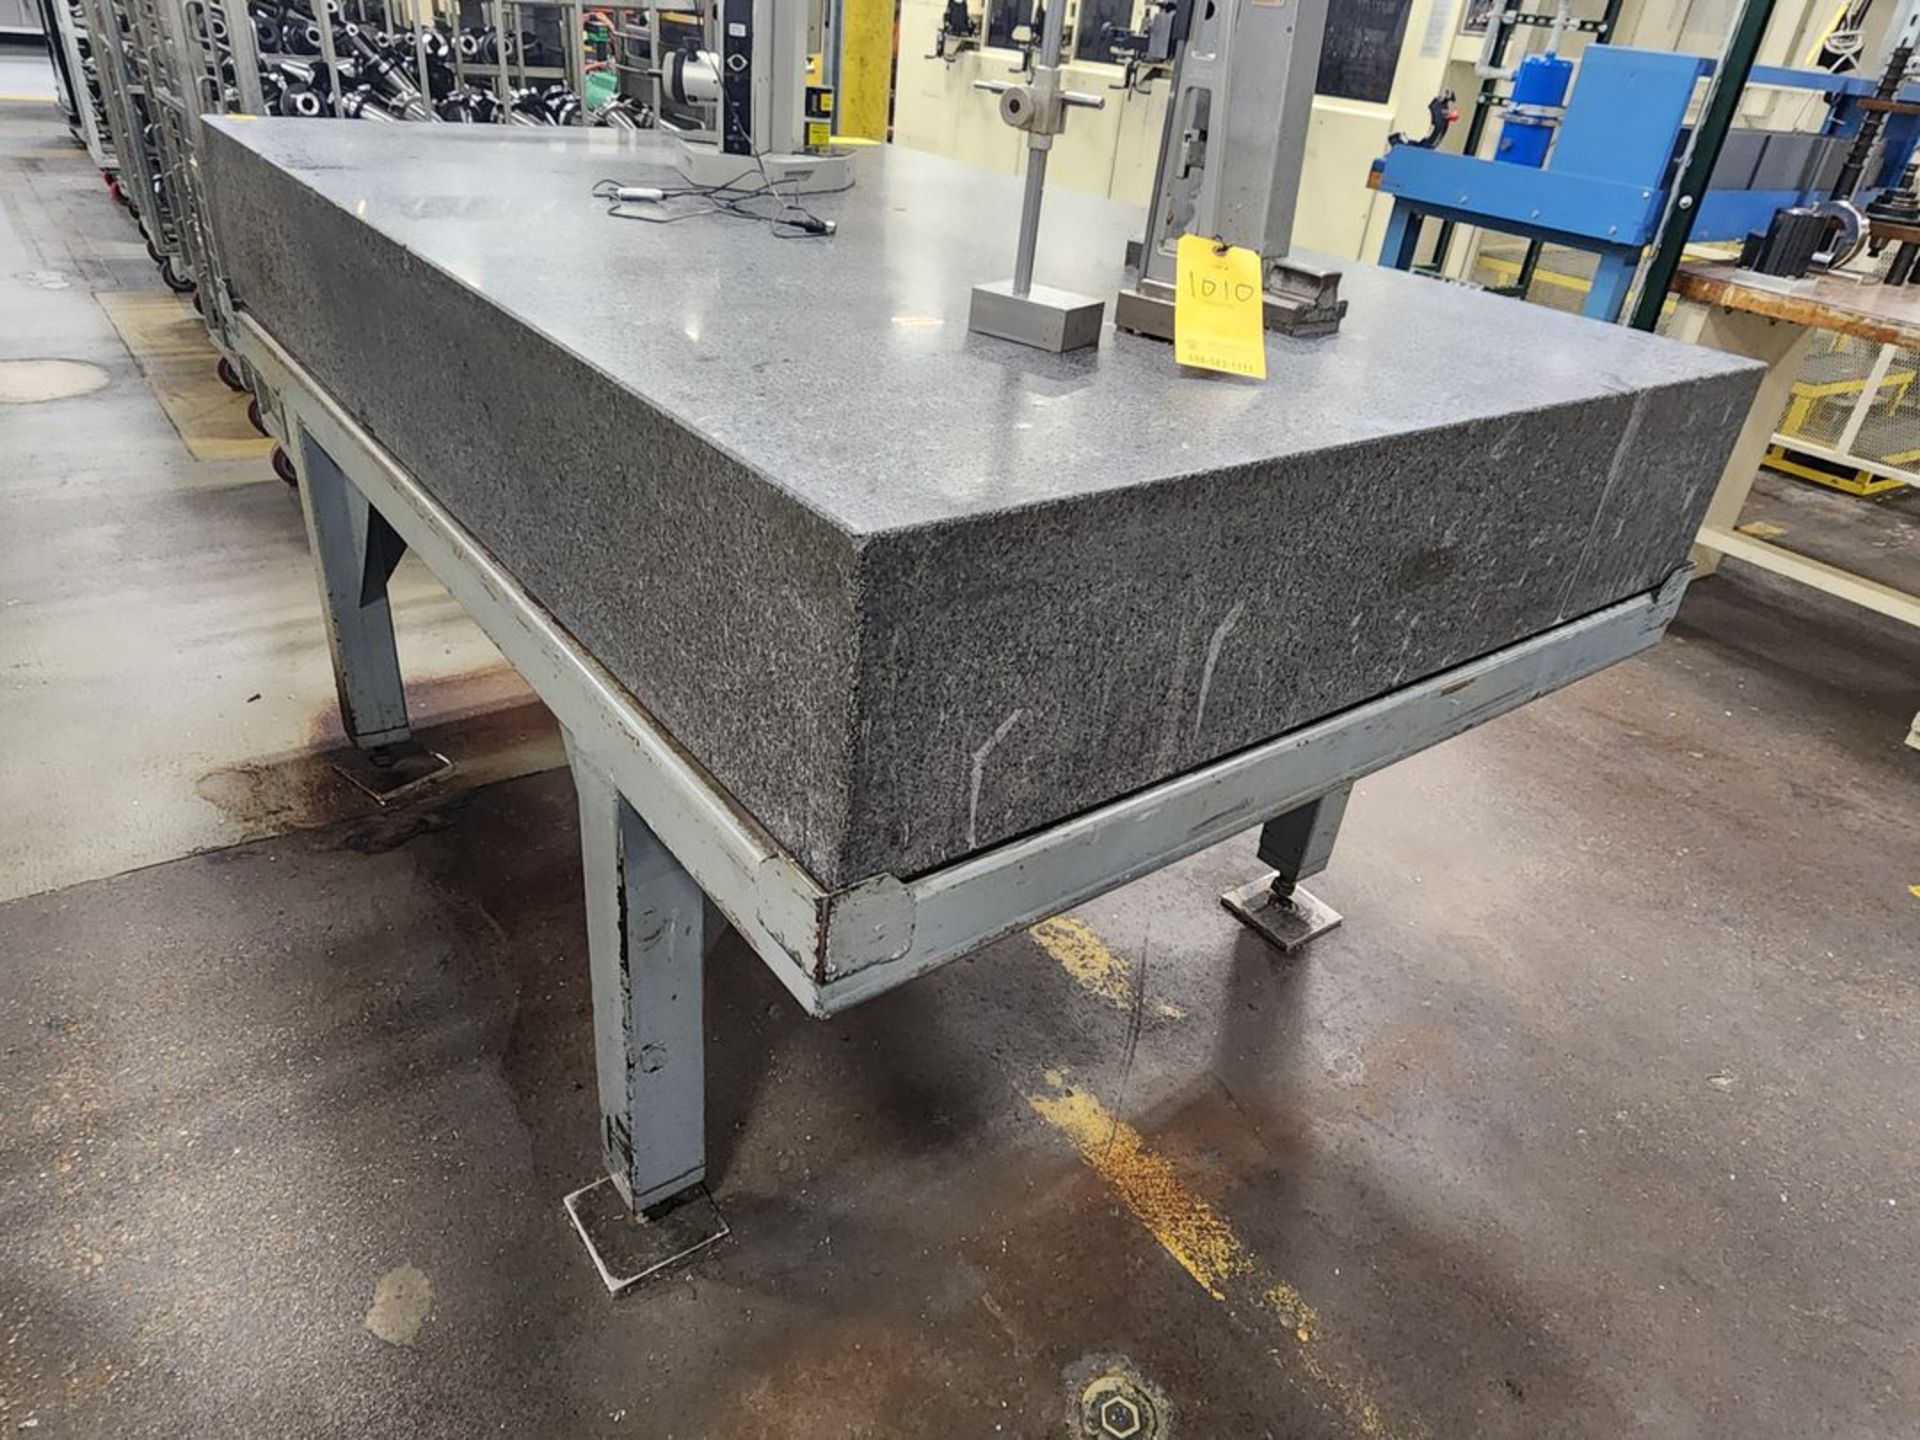 Surface Granite Plate 72" x 48" x 10-1/2" - Image 3 of 3